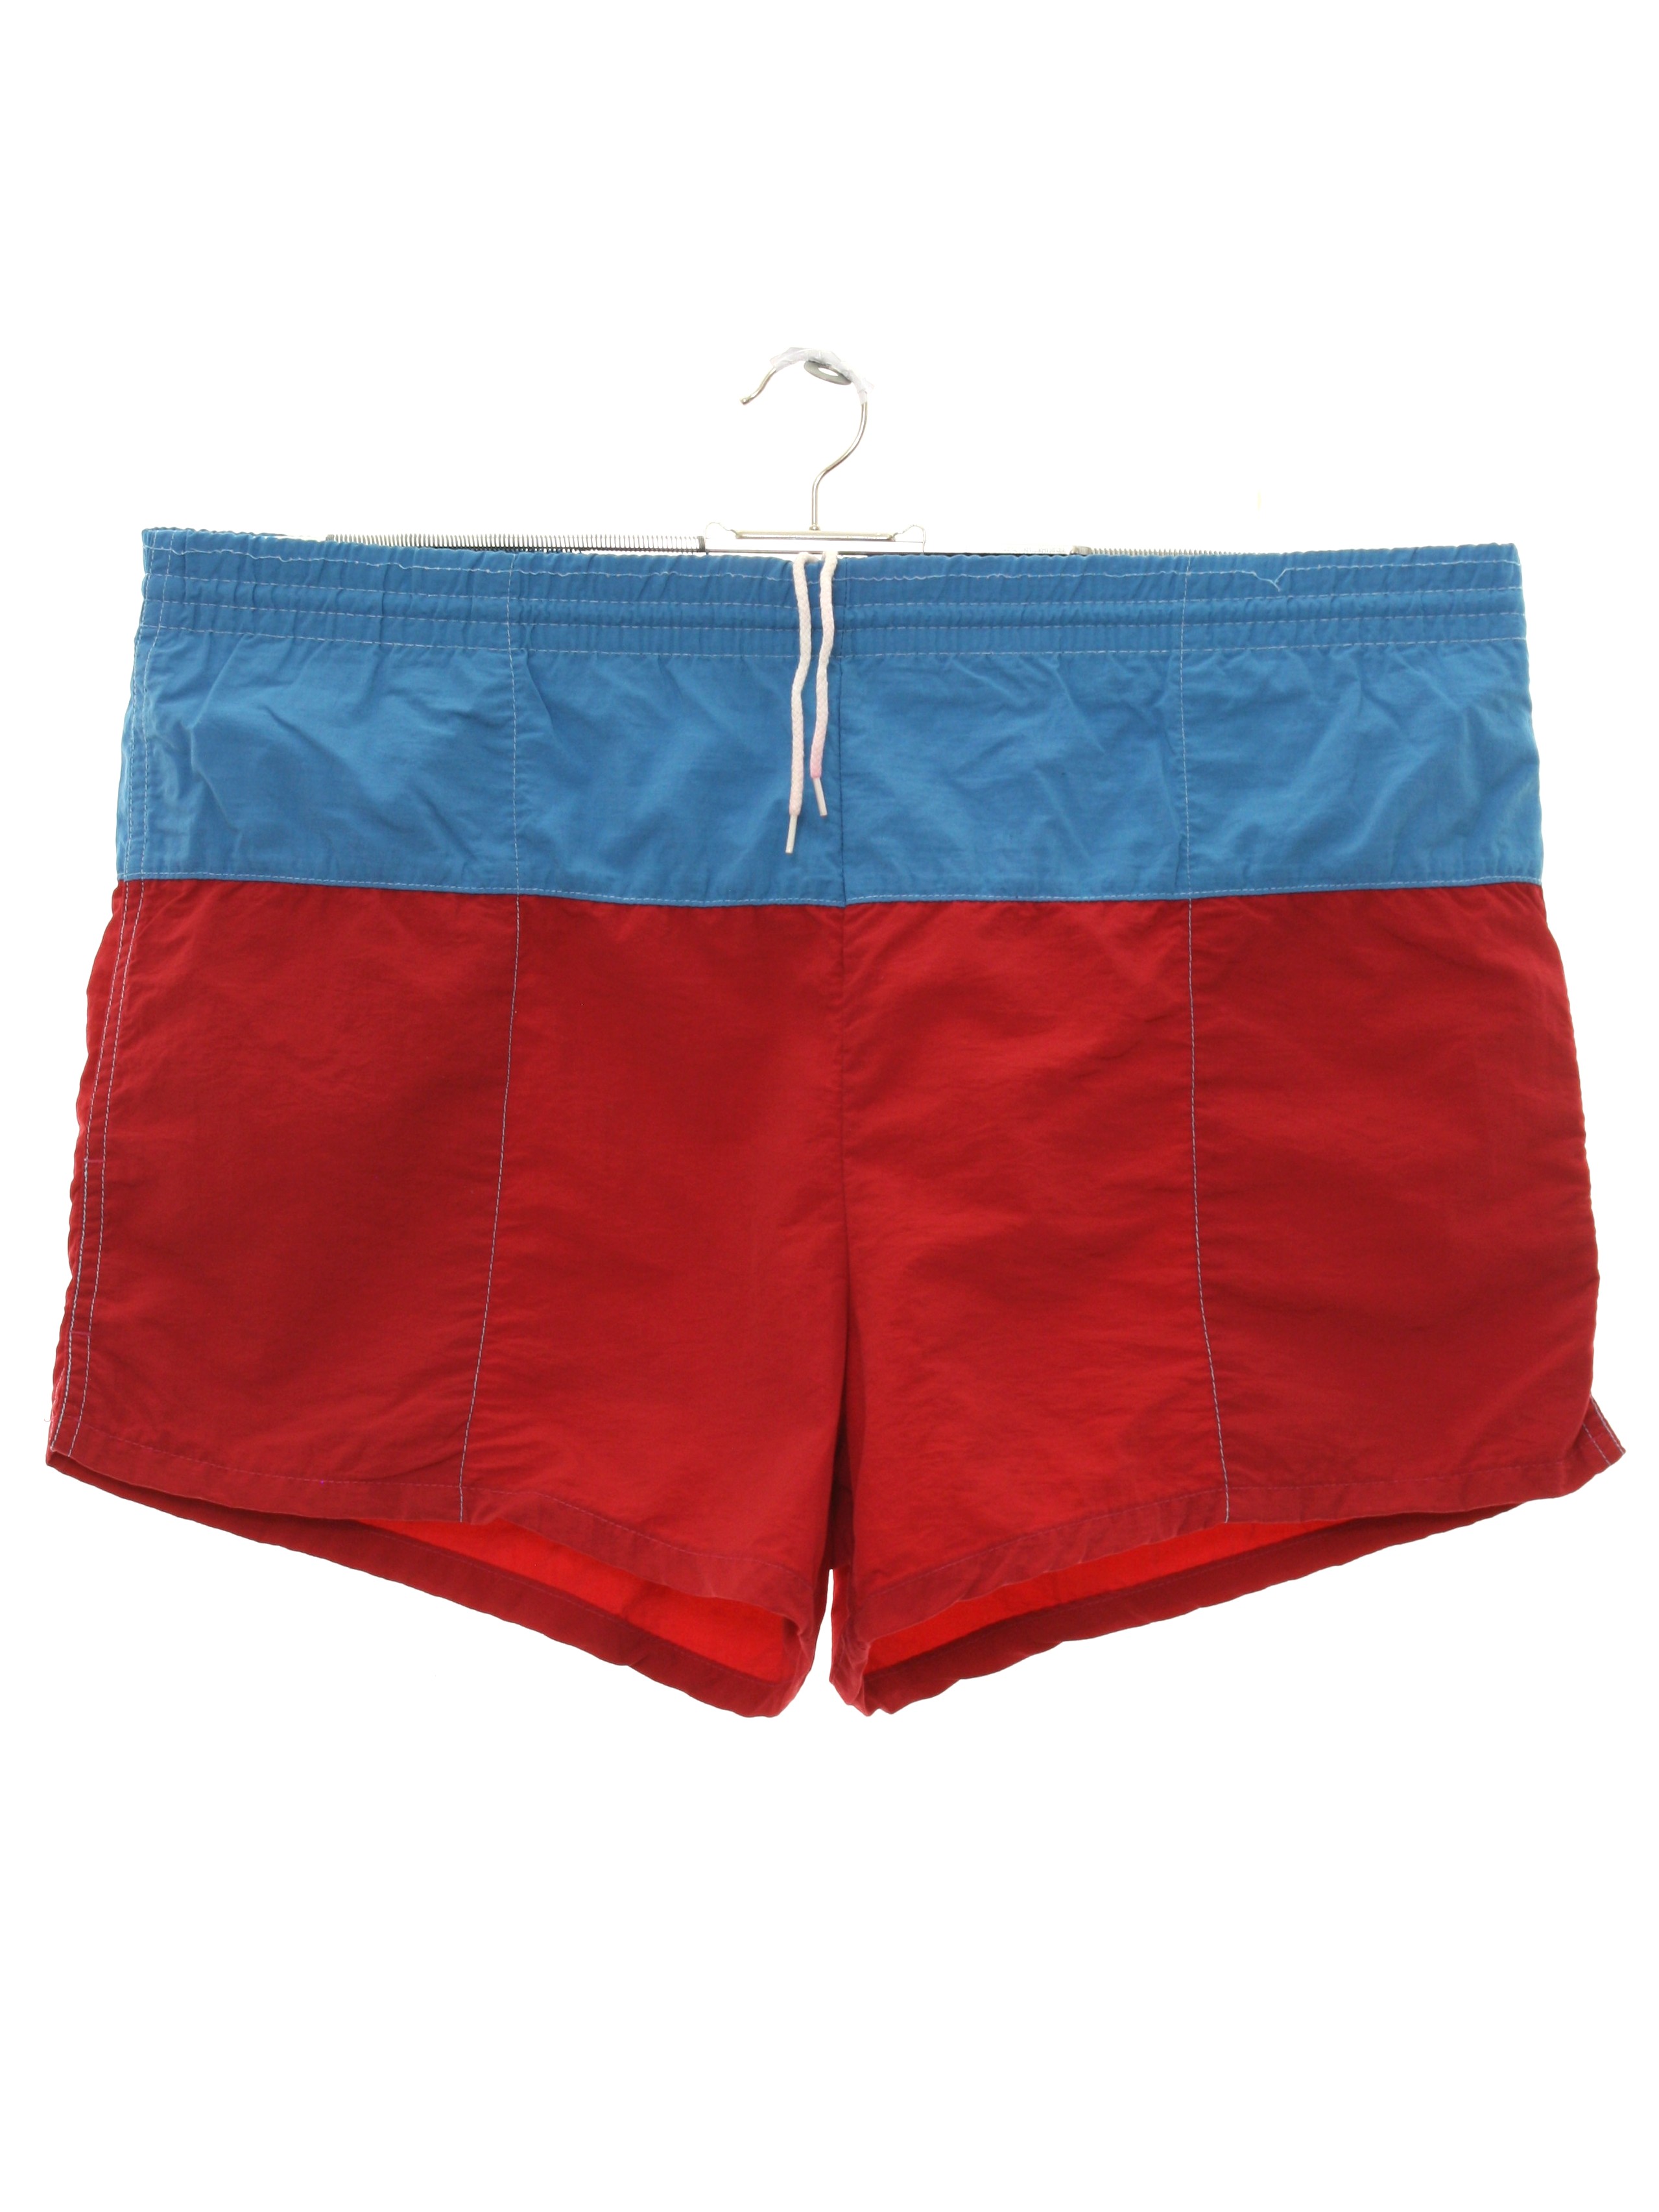 Swimsuit/Swimwear: (made in 90s) -Lands End- Mens sky blue and red ...